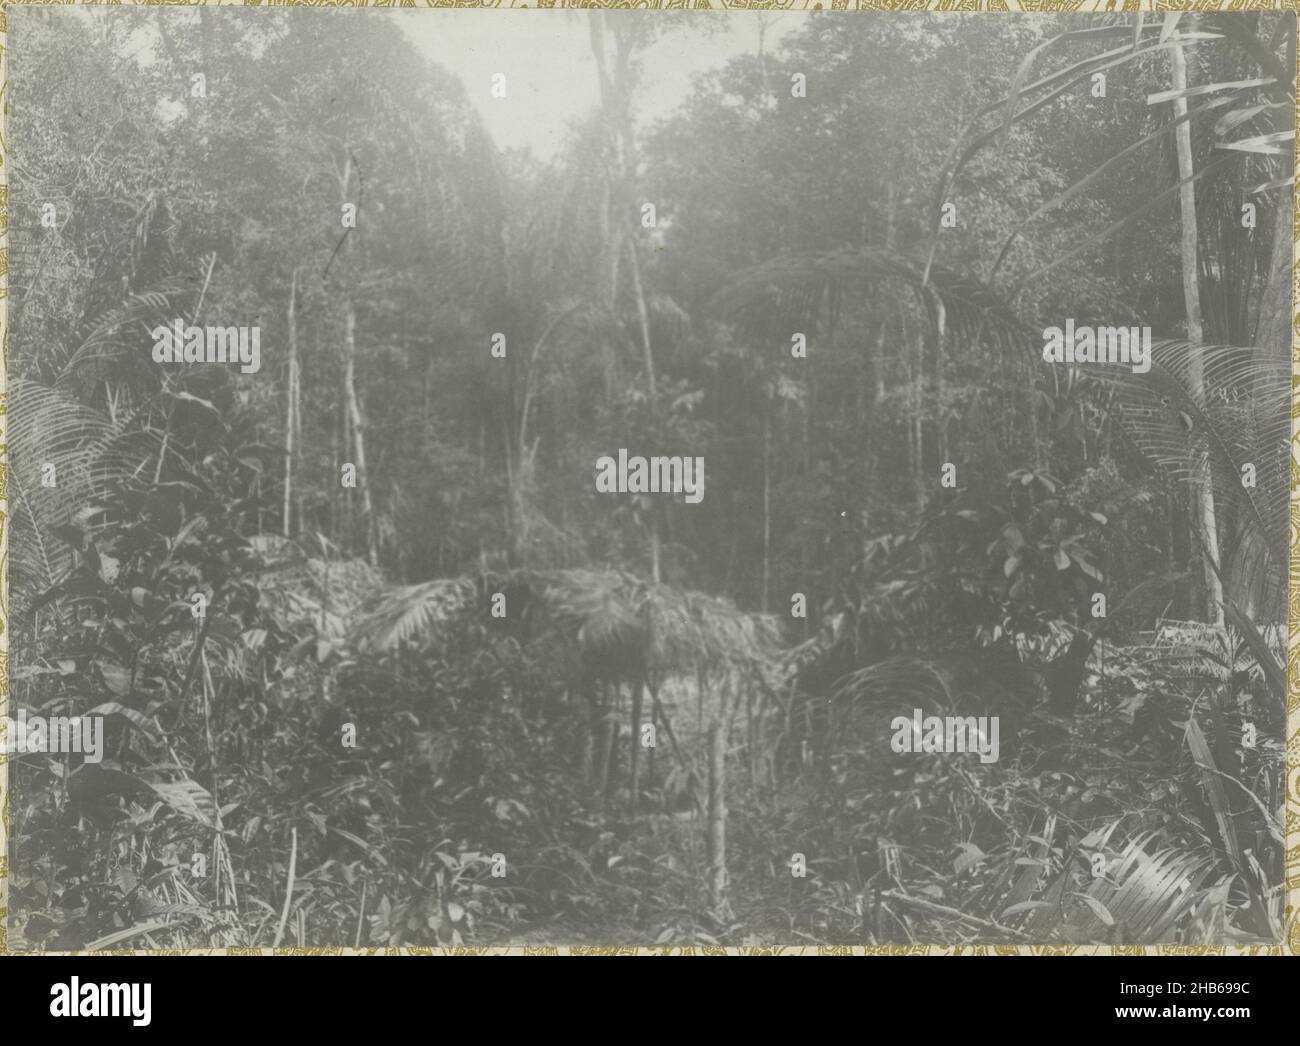 Jungle, View in the Surinamese jungle. Part of the photo album Souvenir de Voyage (part 1), about the life of the Doijer family in and around the plantation Ma Retraite in Suriname in the years 1906-1913., Hendrik Doijer (attributed to), Suriname, 1906 - 1913, photographic support, gelatin silver print, height 122 mm × width 165 mm Stock Photo